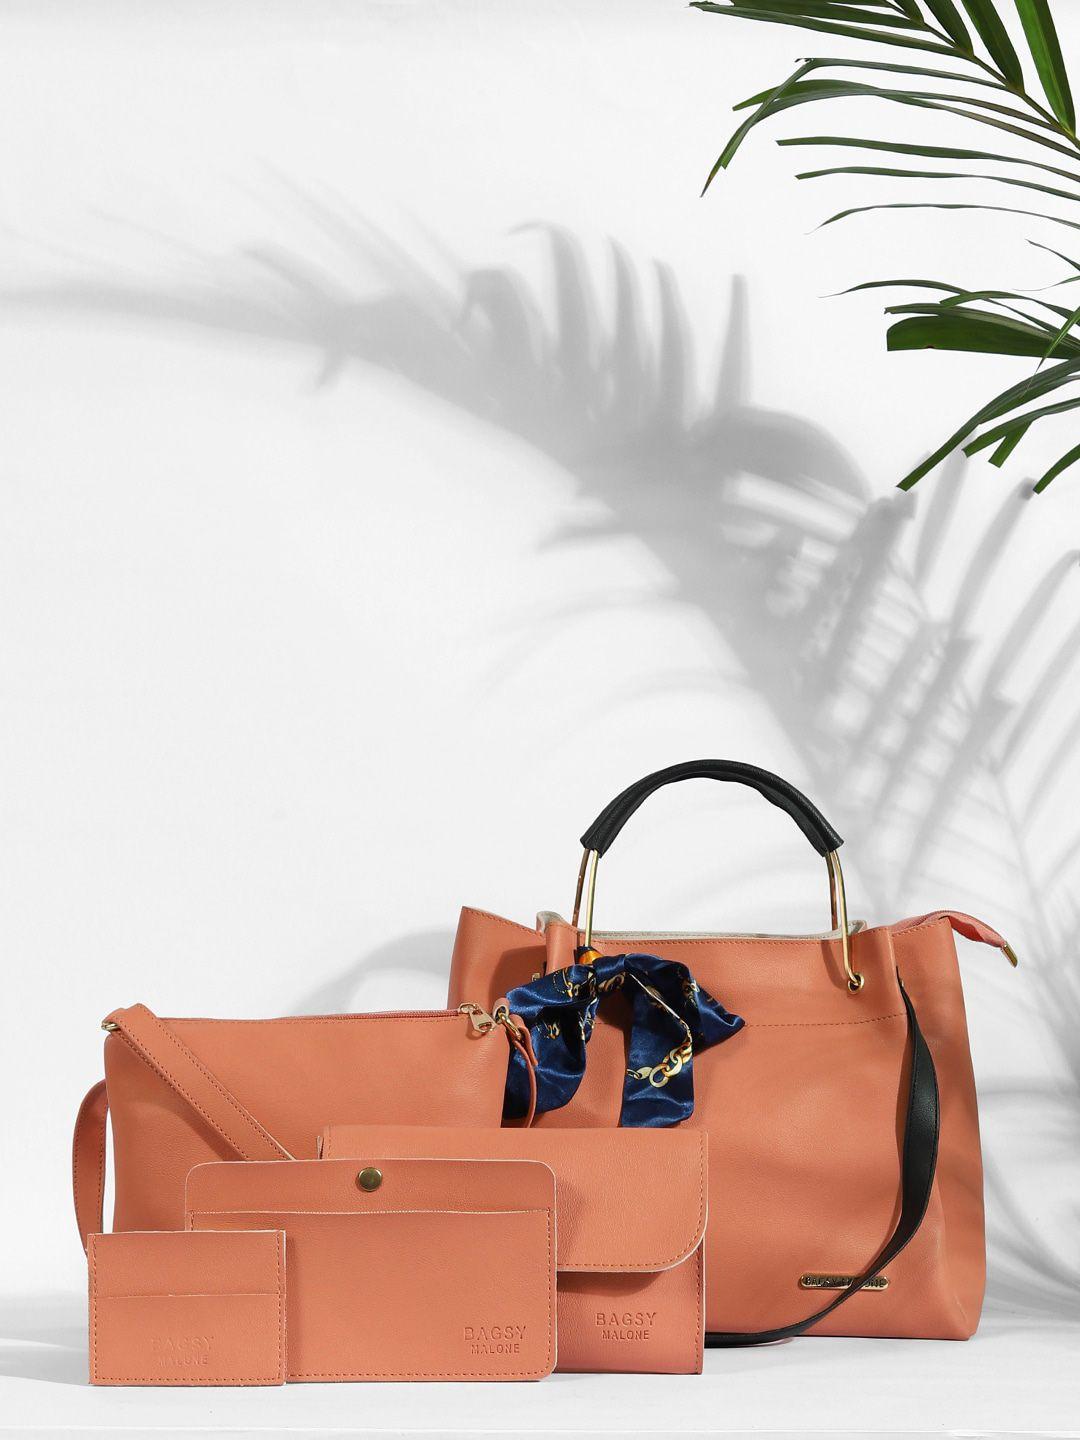 bagsy malone peach-coloured pu structured handheld bag with bow detail